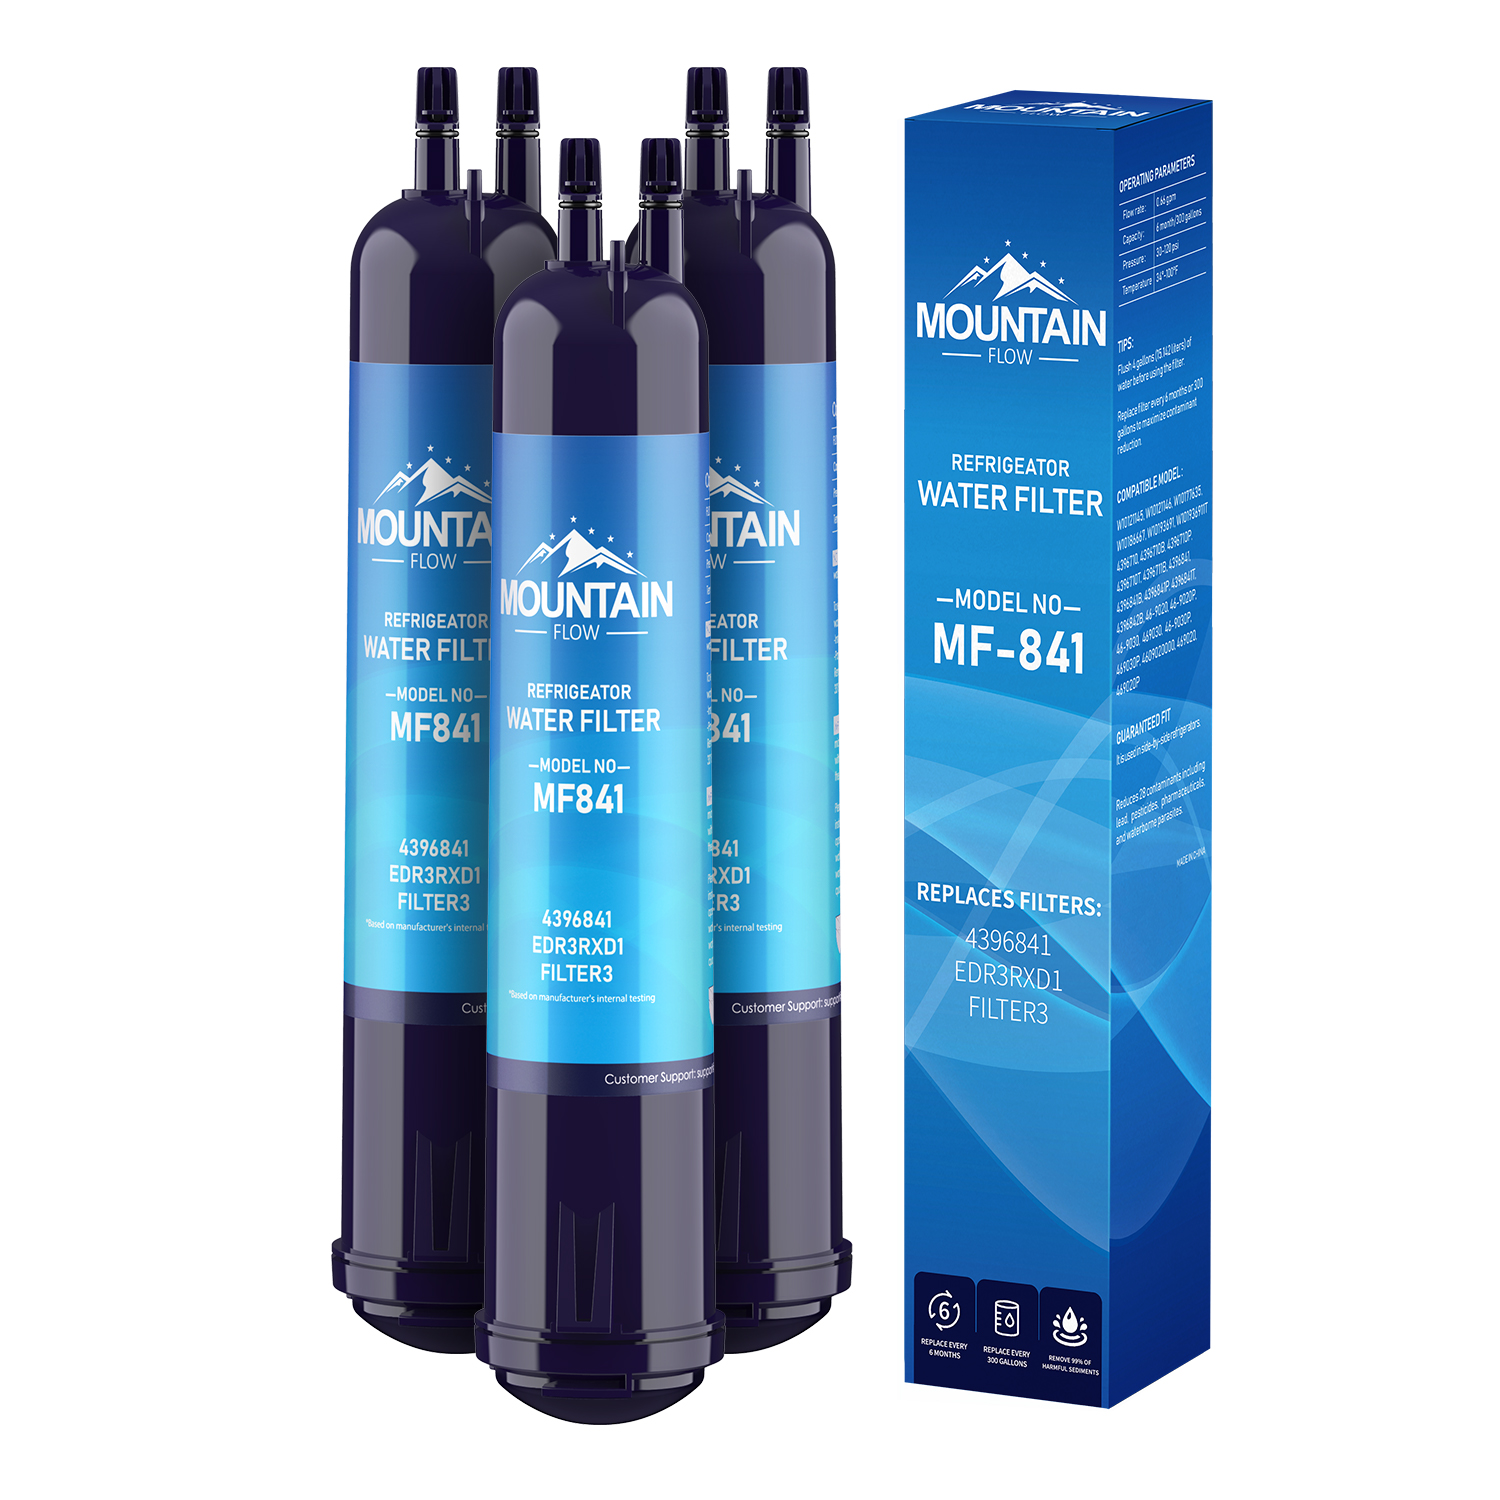 EDR3RXD1 Water Filter Replacement 4396841, 4396710, 9083, 9030 Fridge Filter, by MountainFlow, 3Packs